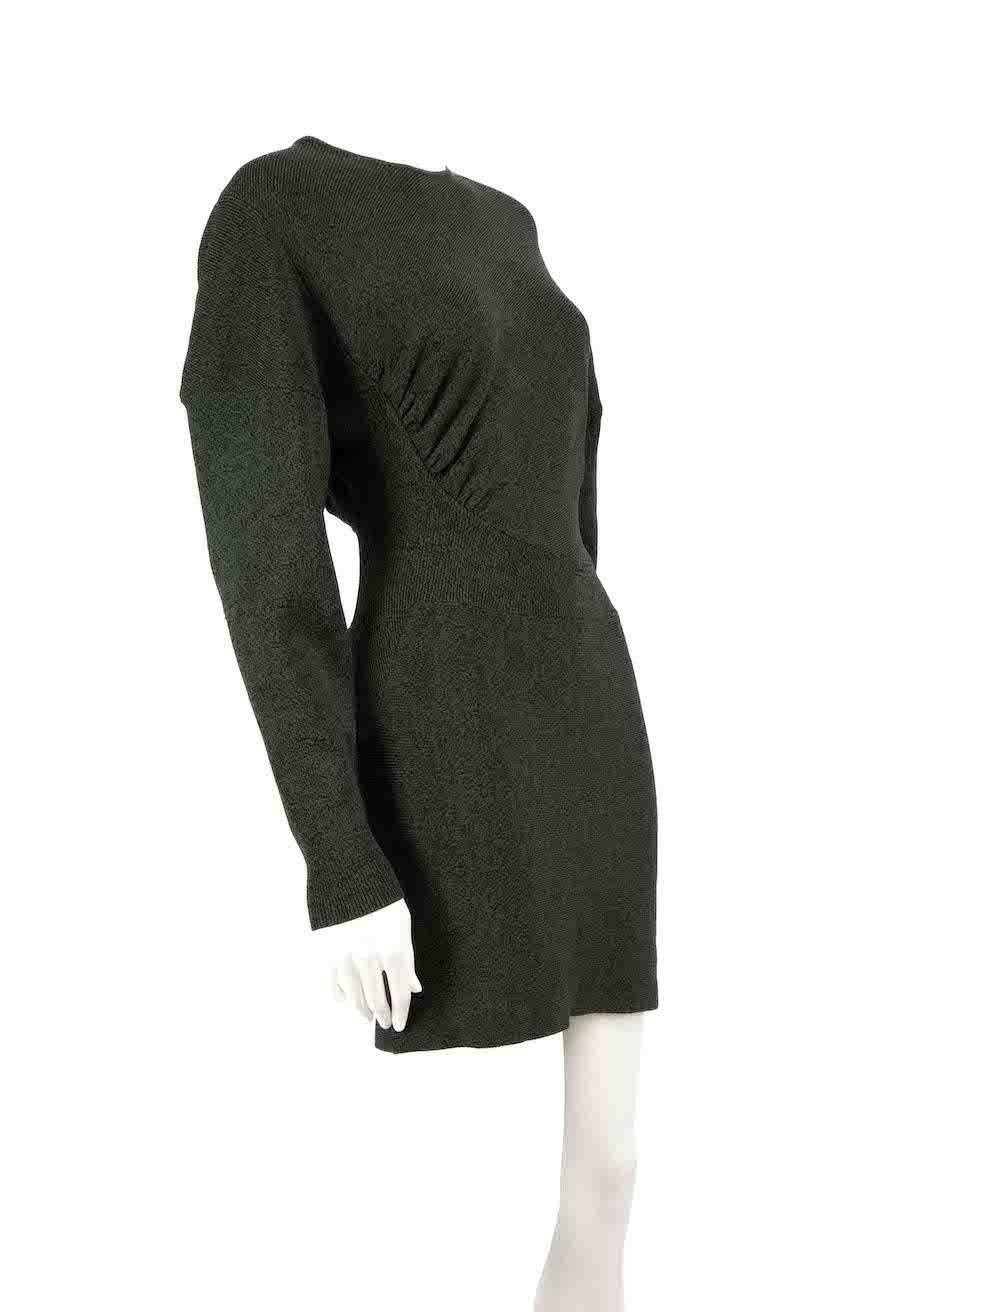 CONDITION is Very good. Minimal wear to dress is evident. Minimal wear to the left sleeve with a small pluck to the knit on this used Ganni designer resale item.
 
 
 
 Details
 
 
 Green
 
 Viscose
 
 Knit dress
 
 Long sleeves
 
 Round neck
 
